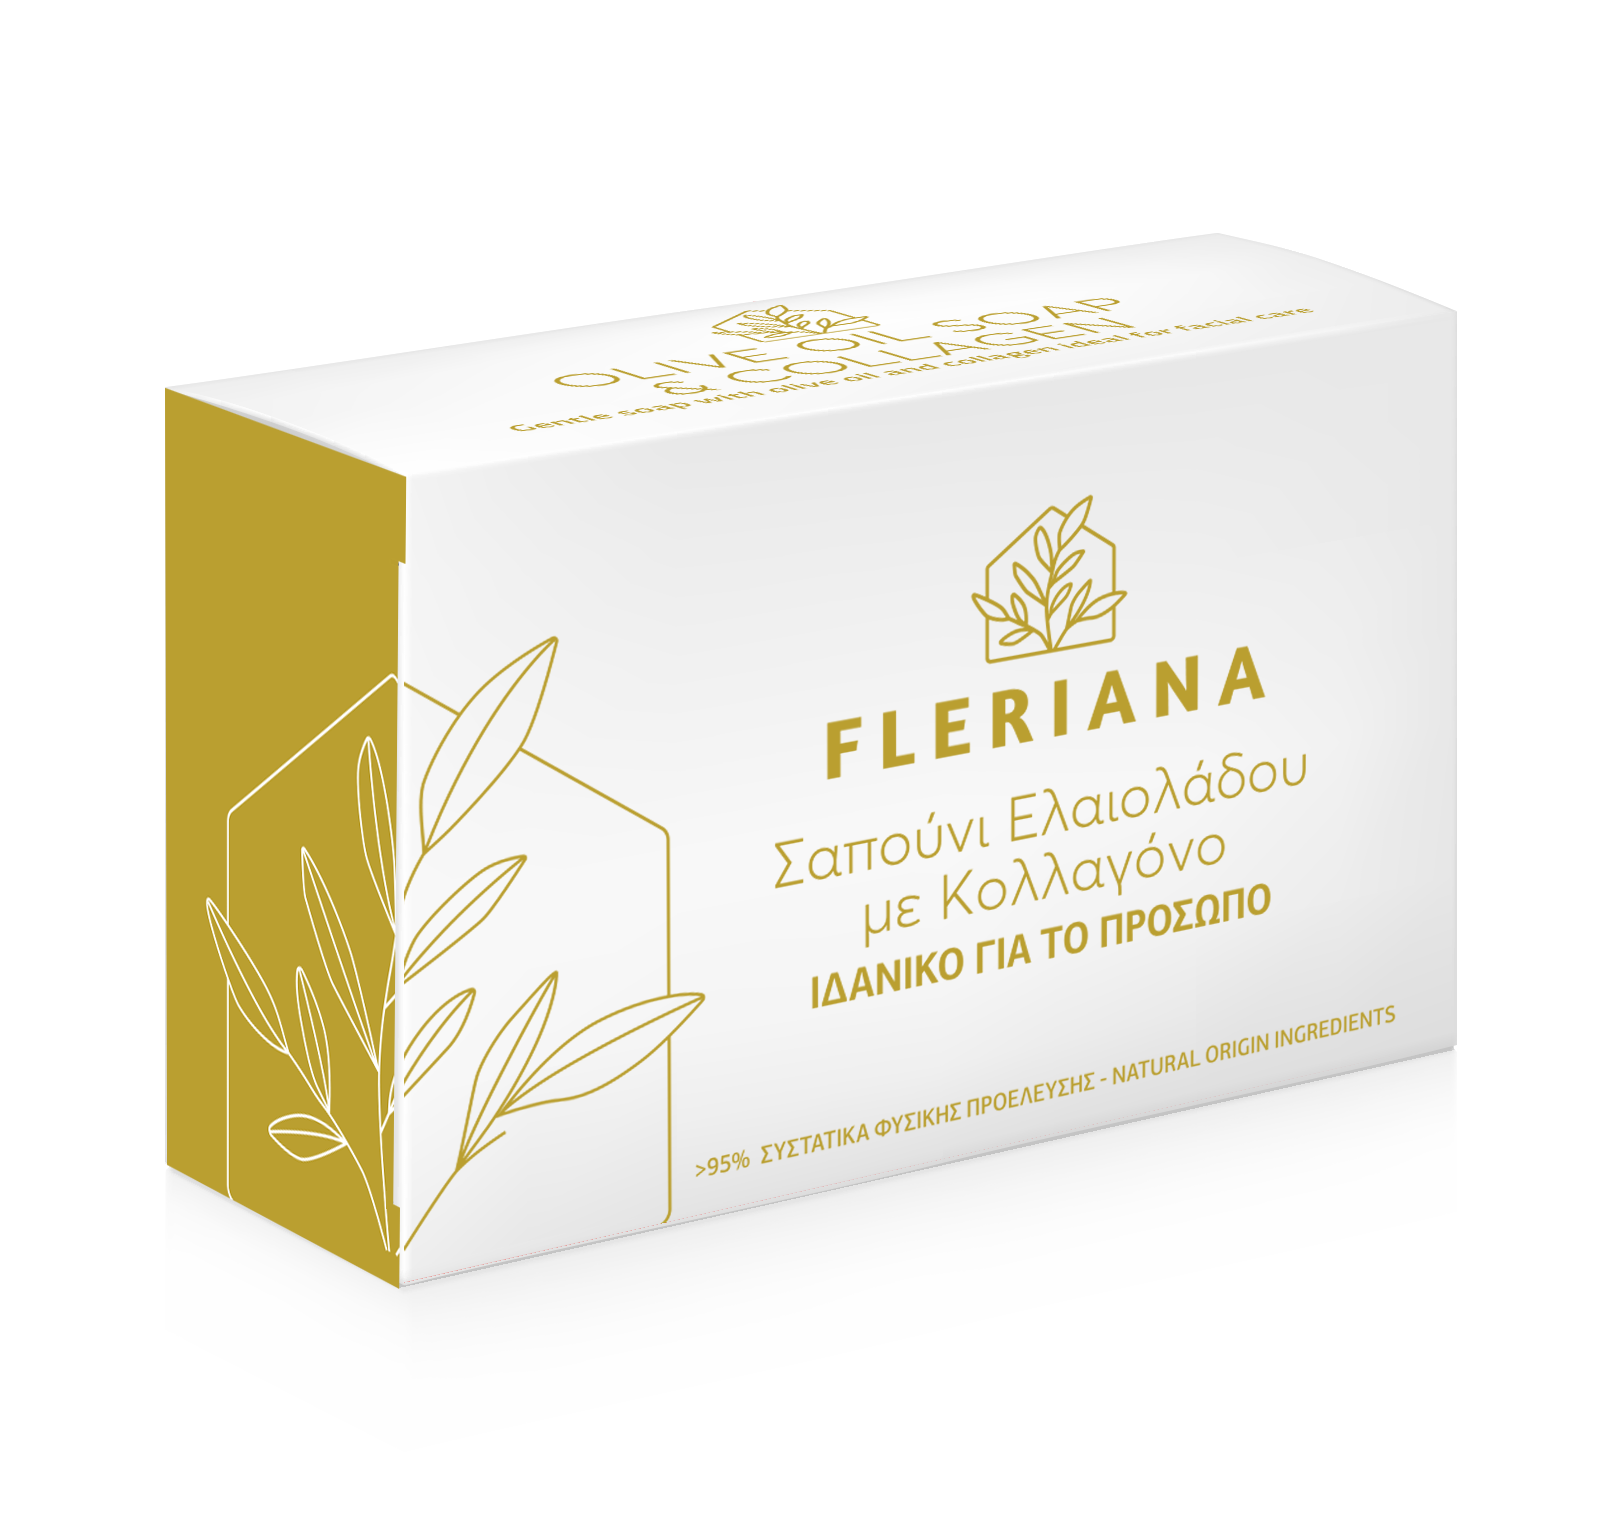 Fleriana face soap with olive oil & collagen